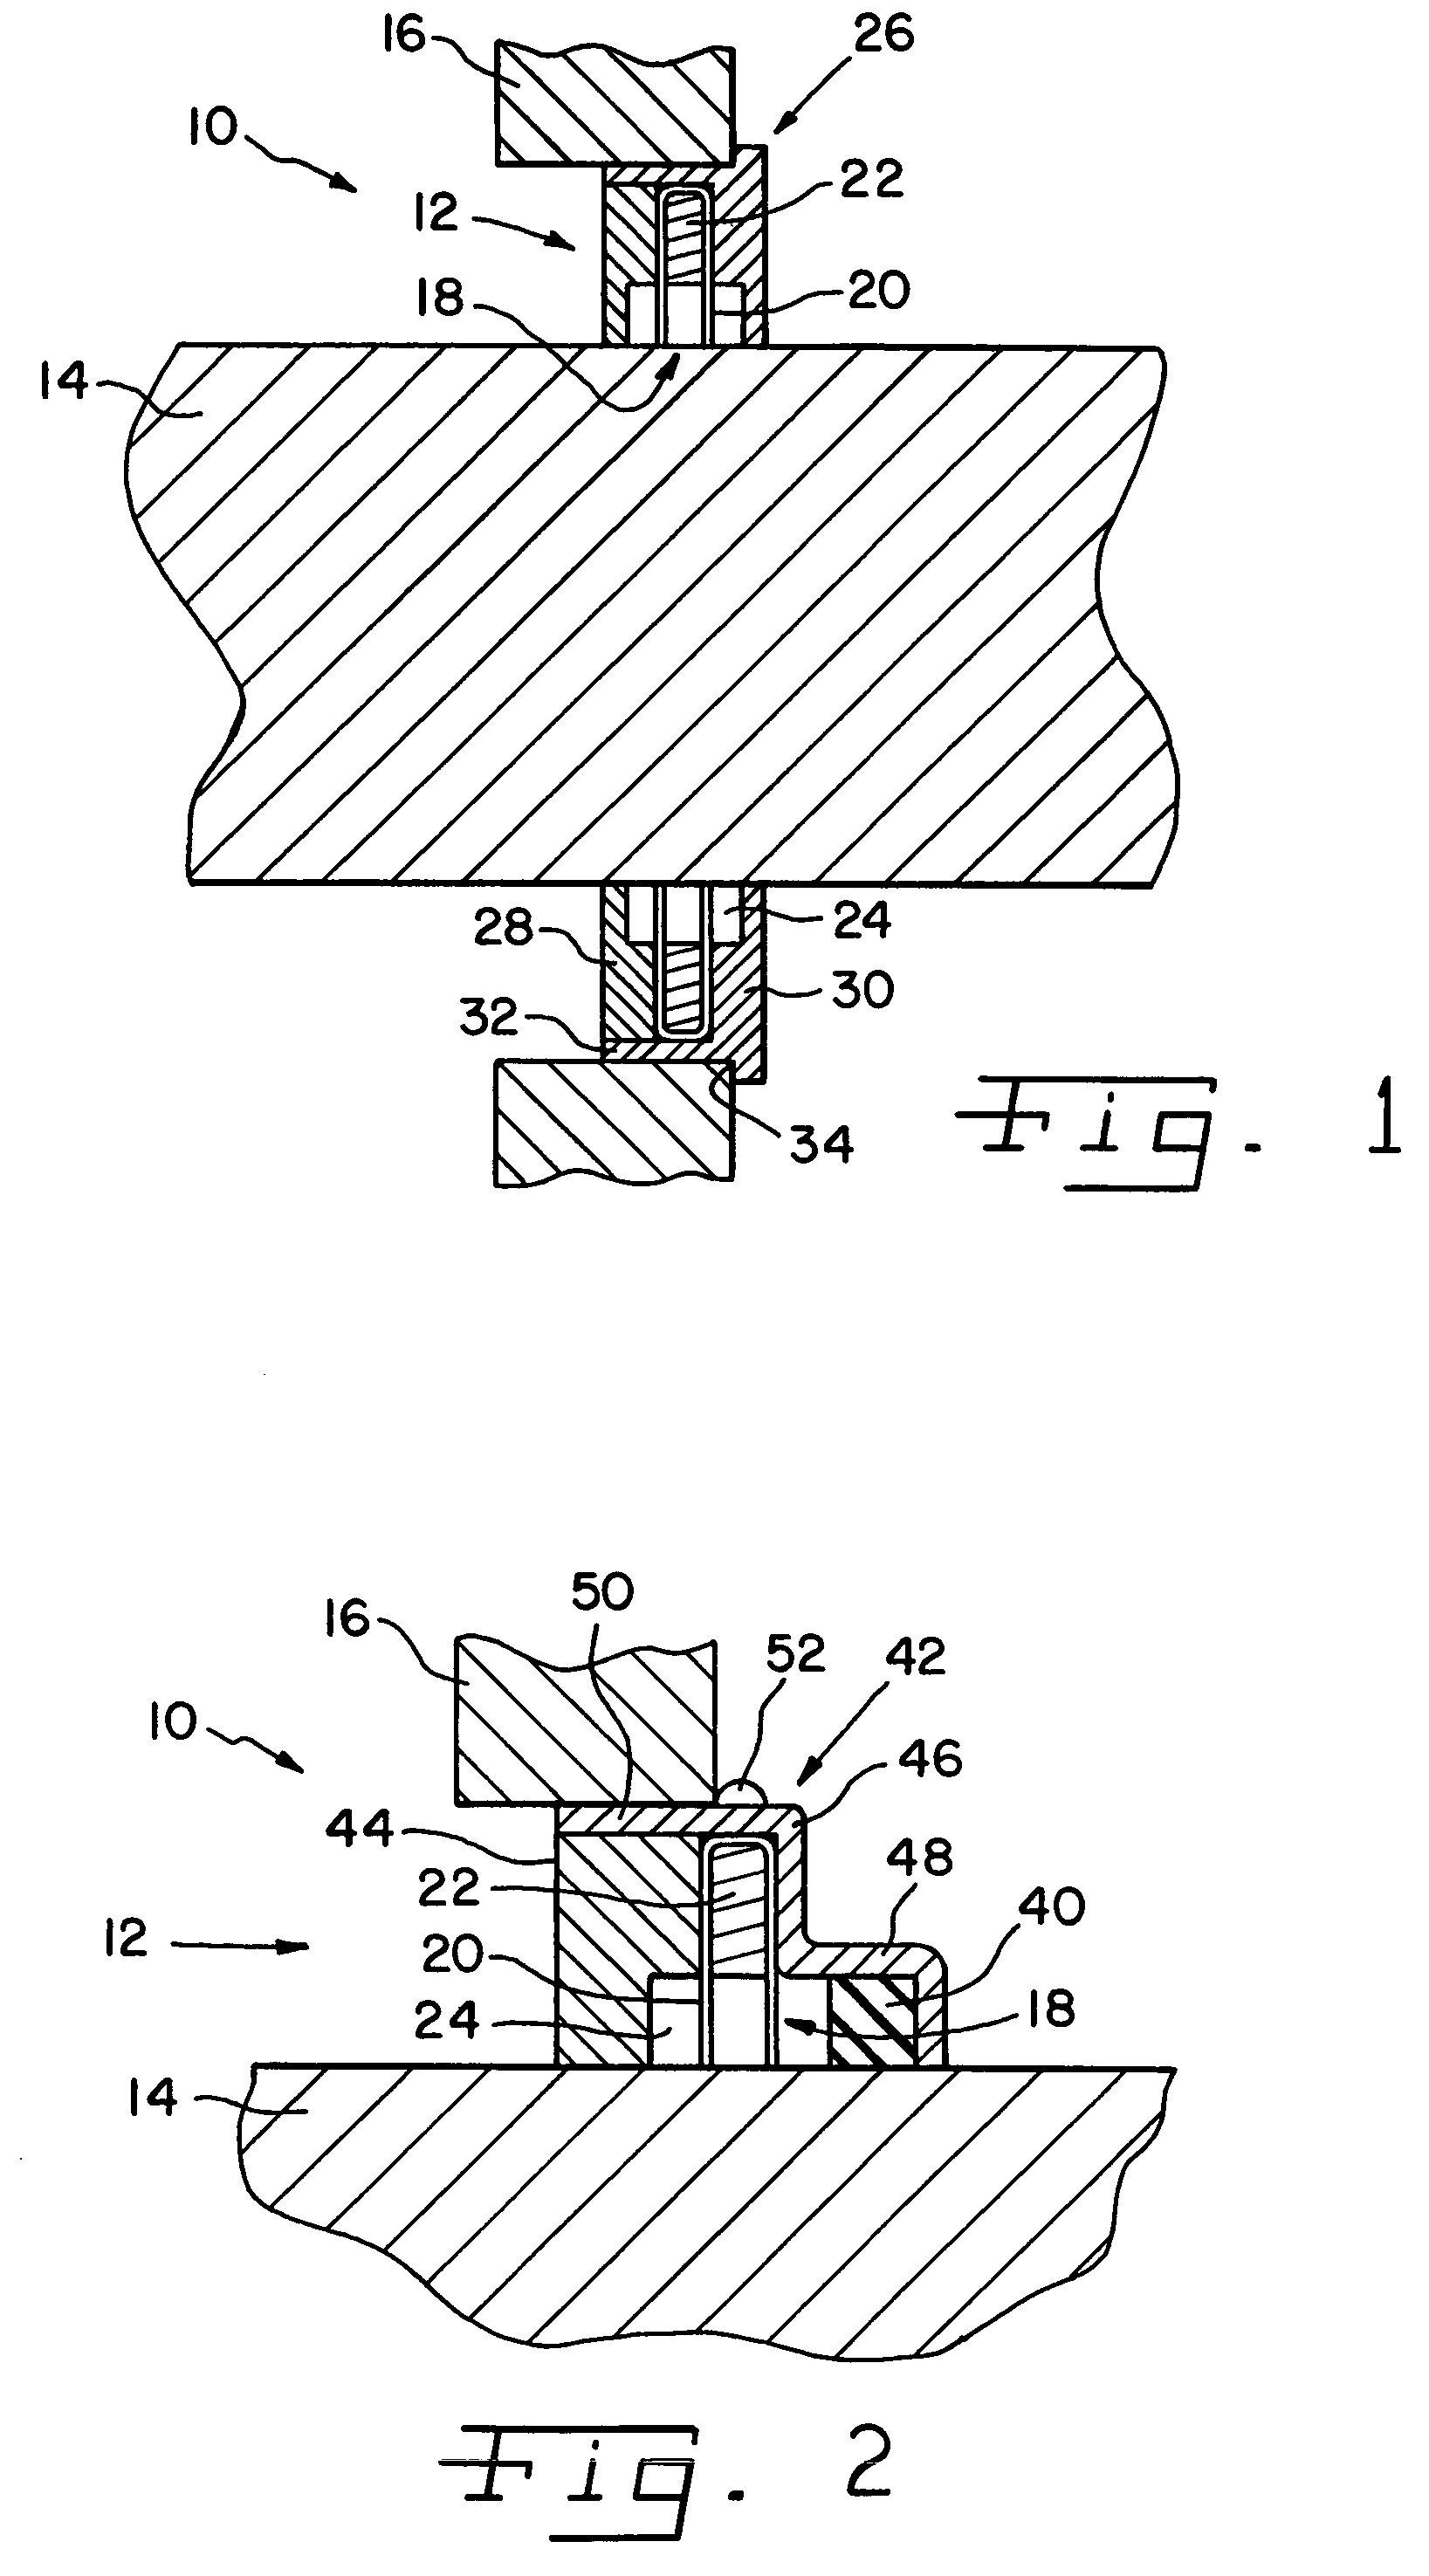 Grounding brush for mitigating electrical current on motor shafts